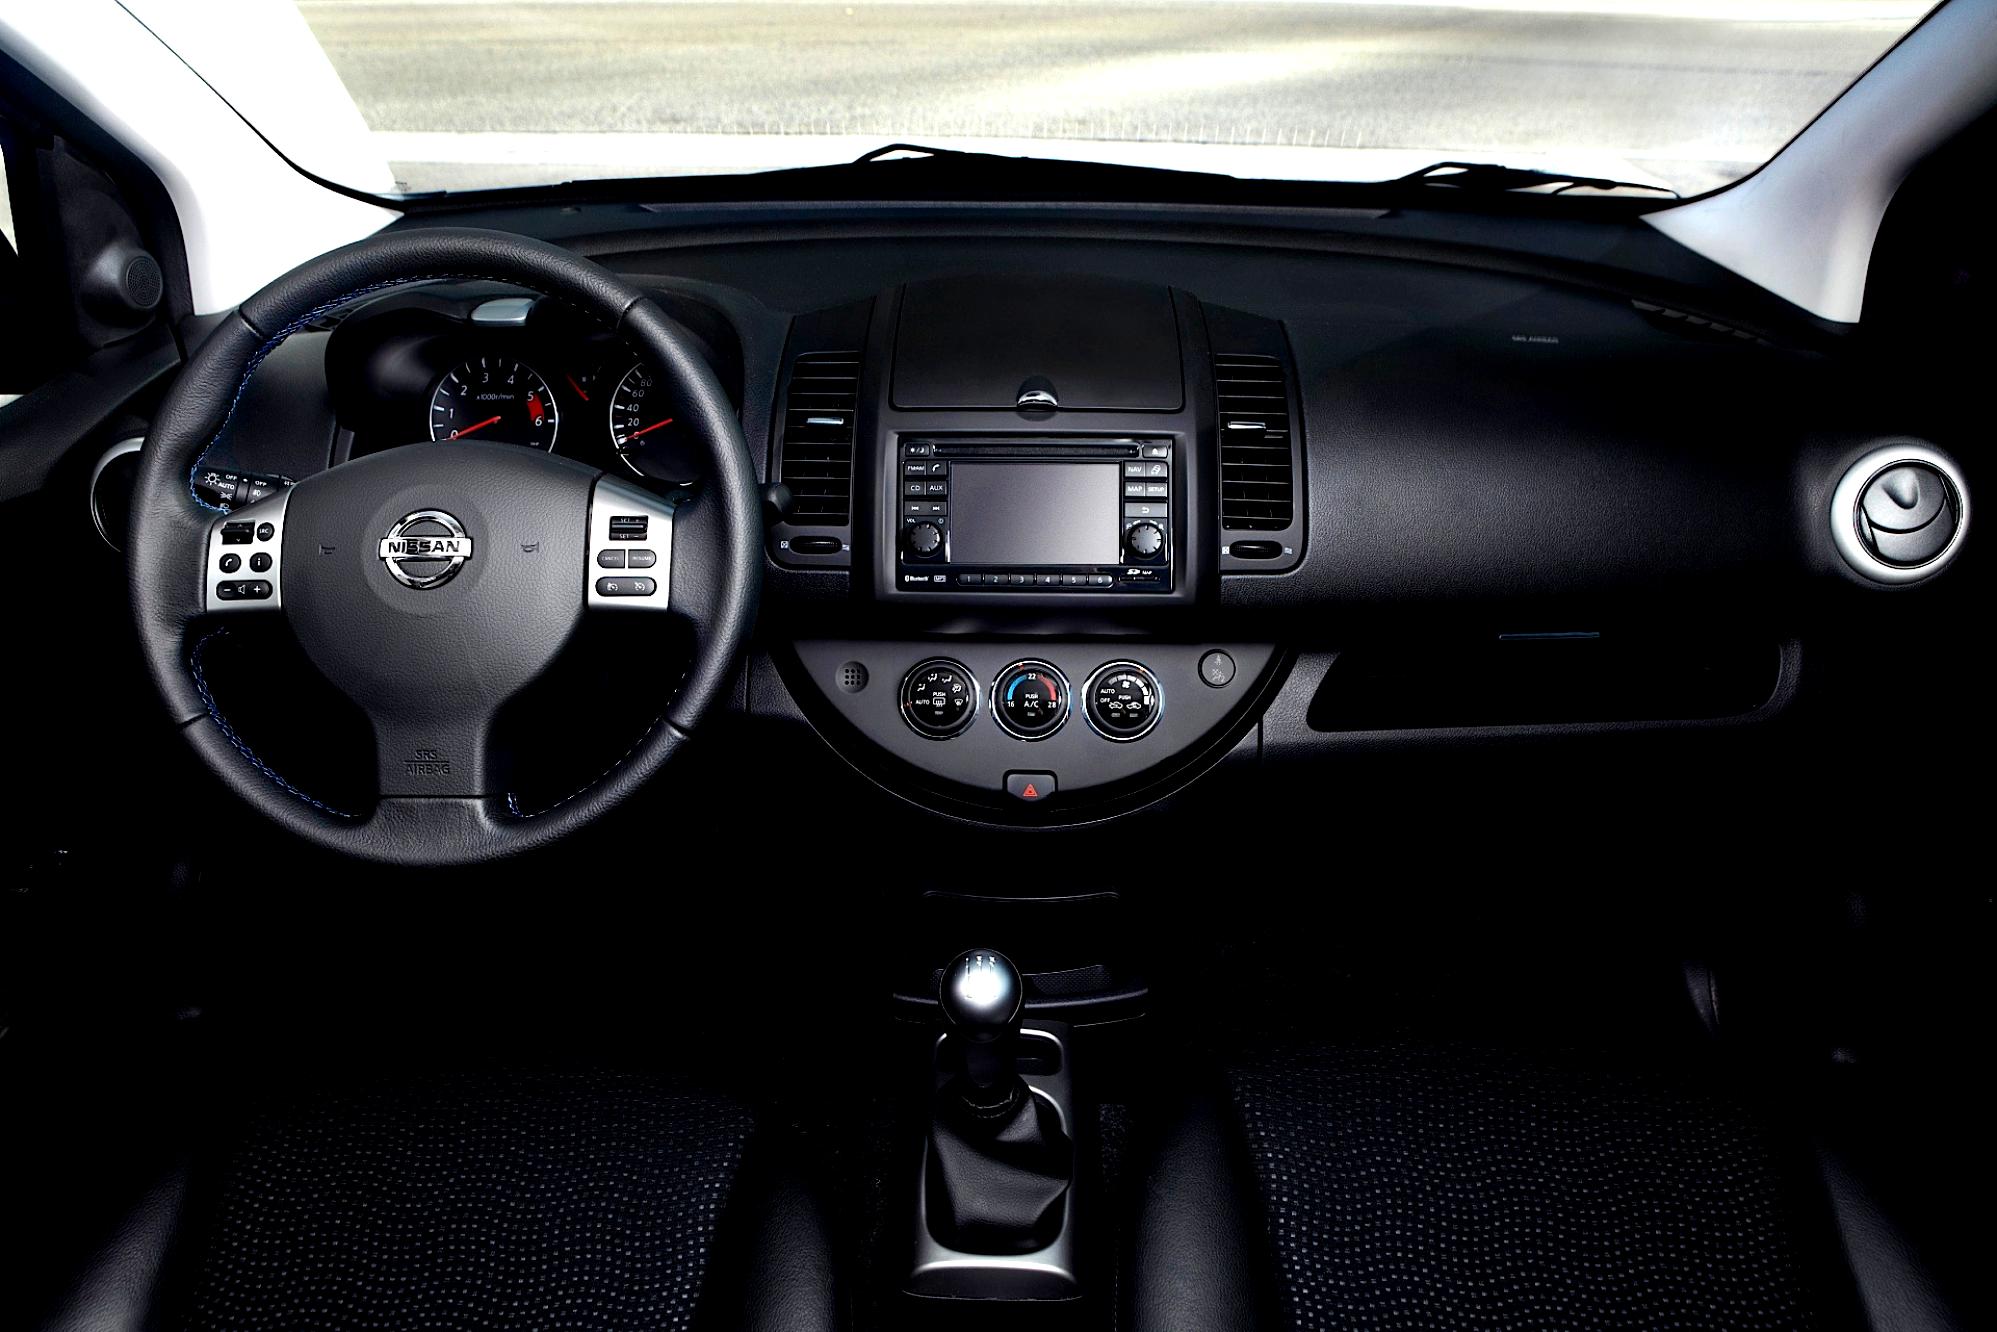 Nissan Note 2013 #129